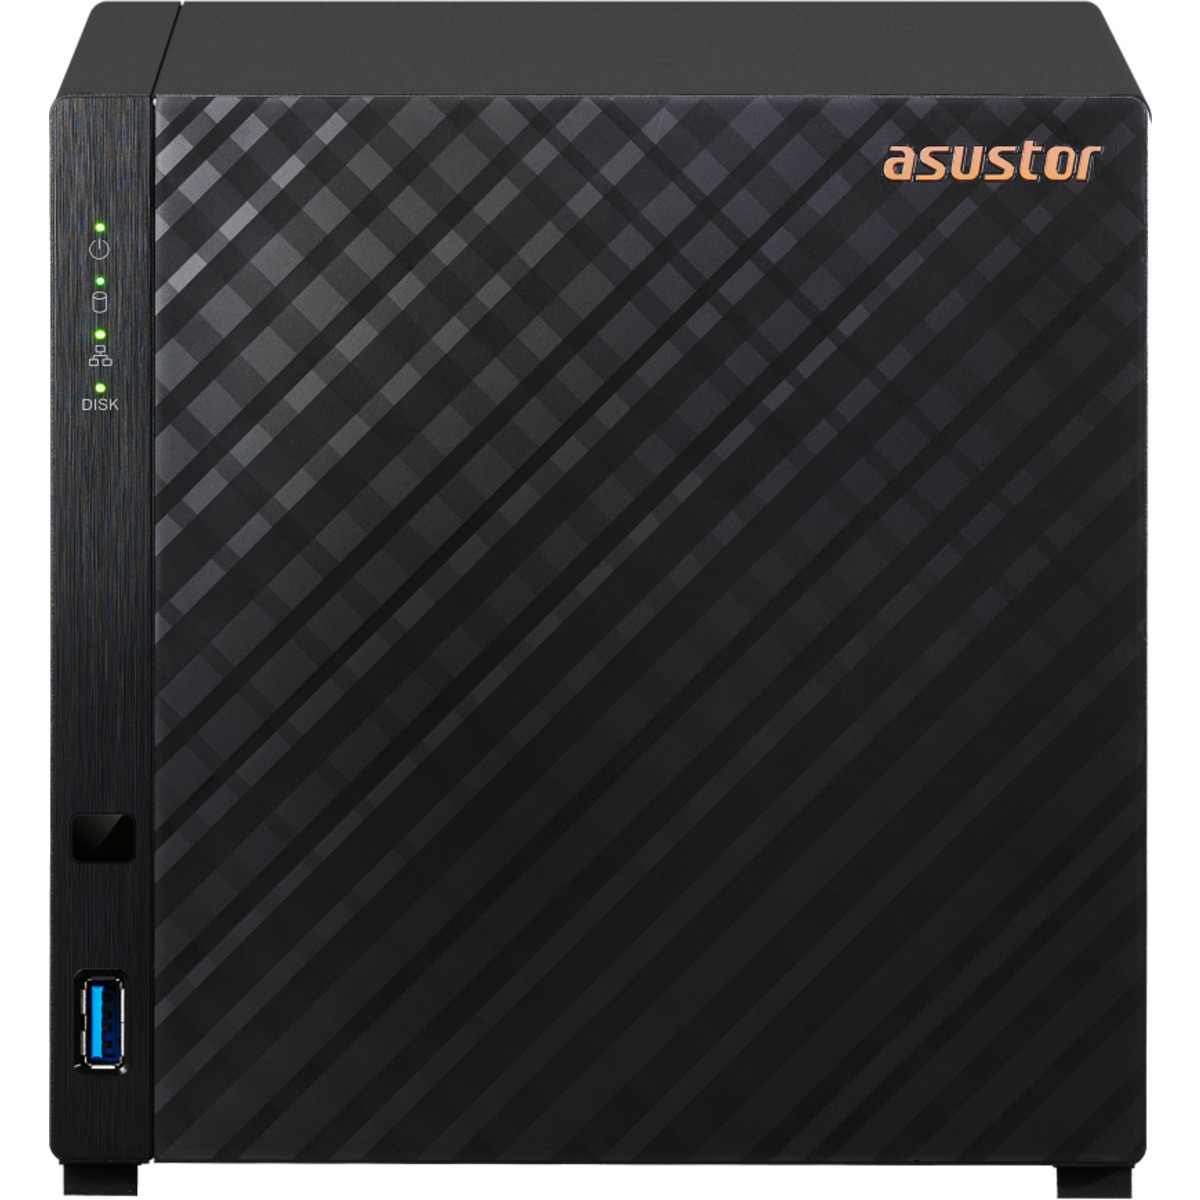 buy $1522 ASUSTOR DRIVESTOR 4 AS1104T 16tb Desktop NAS - Network Attached Storage Device 4x4000gb Samsung 870 EVO MZ-77E4T0BAM 2.5 560/530MB/s SATA 6Gb/s SSD CONSUMER Class Drives Installed - Burn-In Tested - nas headquarters buy network attached storage server device das new raid-5 free shipping simply usa DRIVESTOR 4 AS1104T